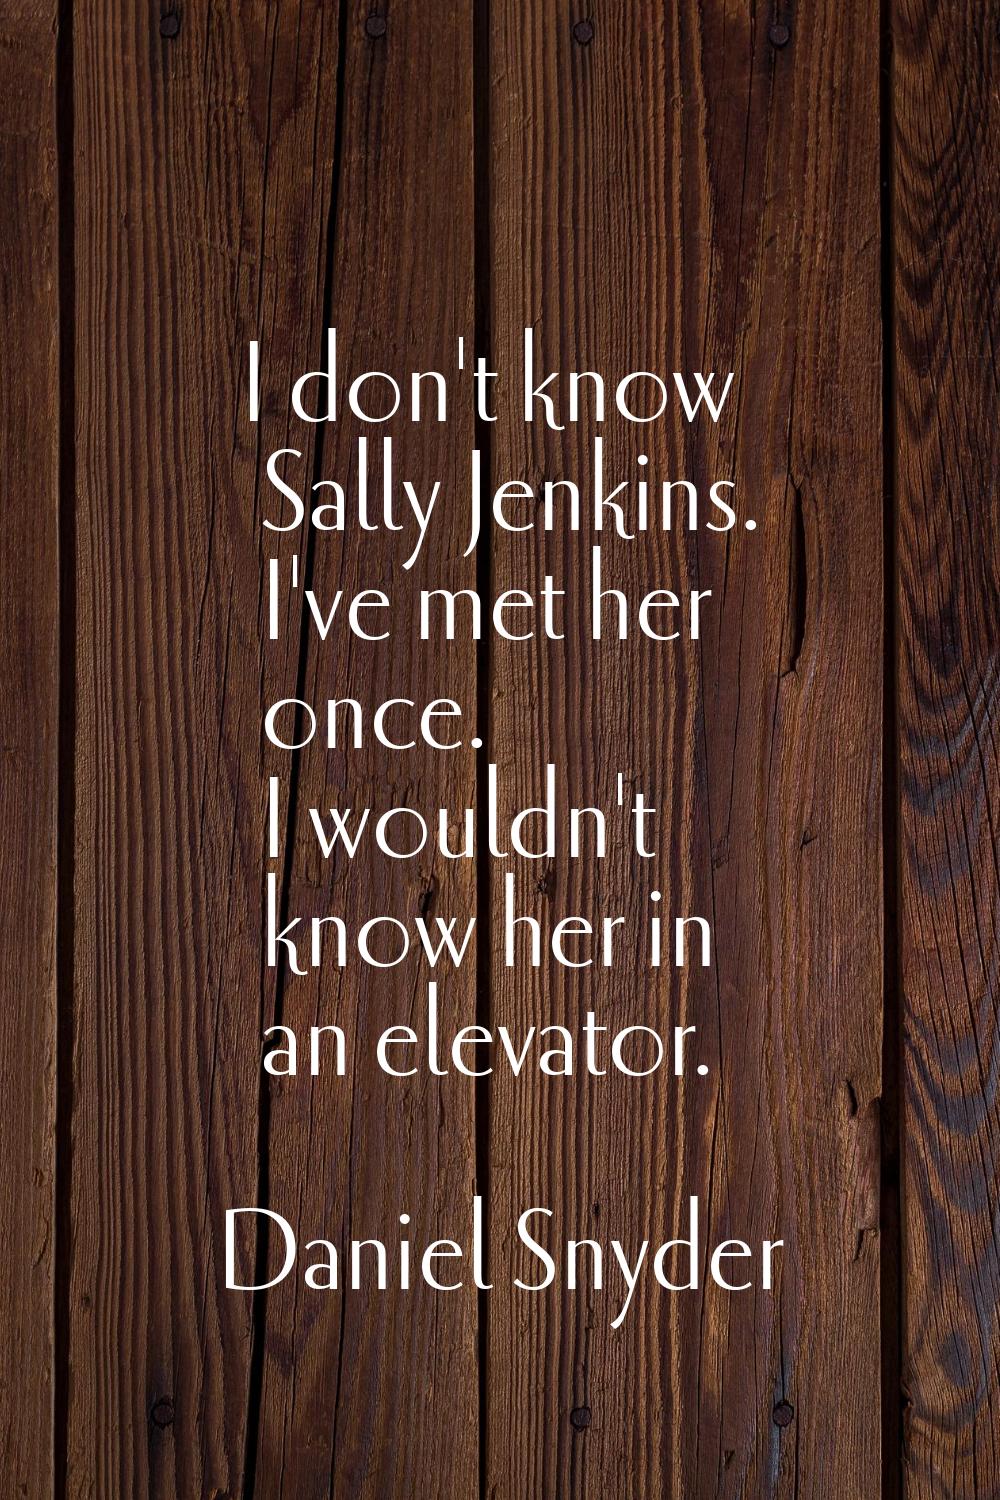 I don't know Sally Jenkins. I've met her once. I wouldn't know her in an elevator.